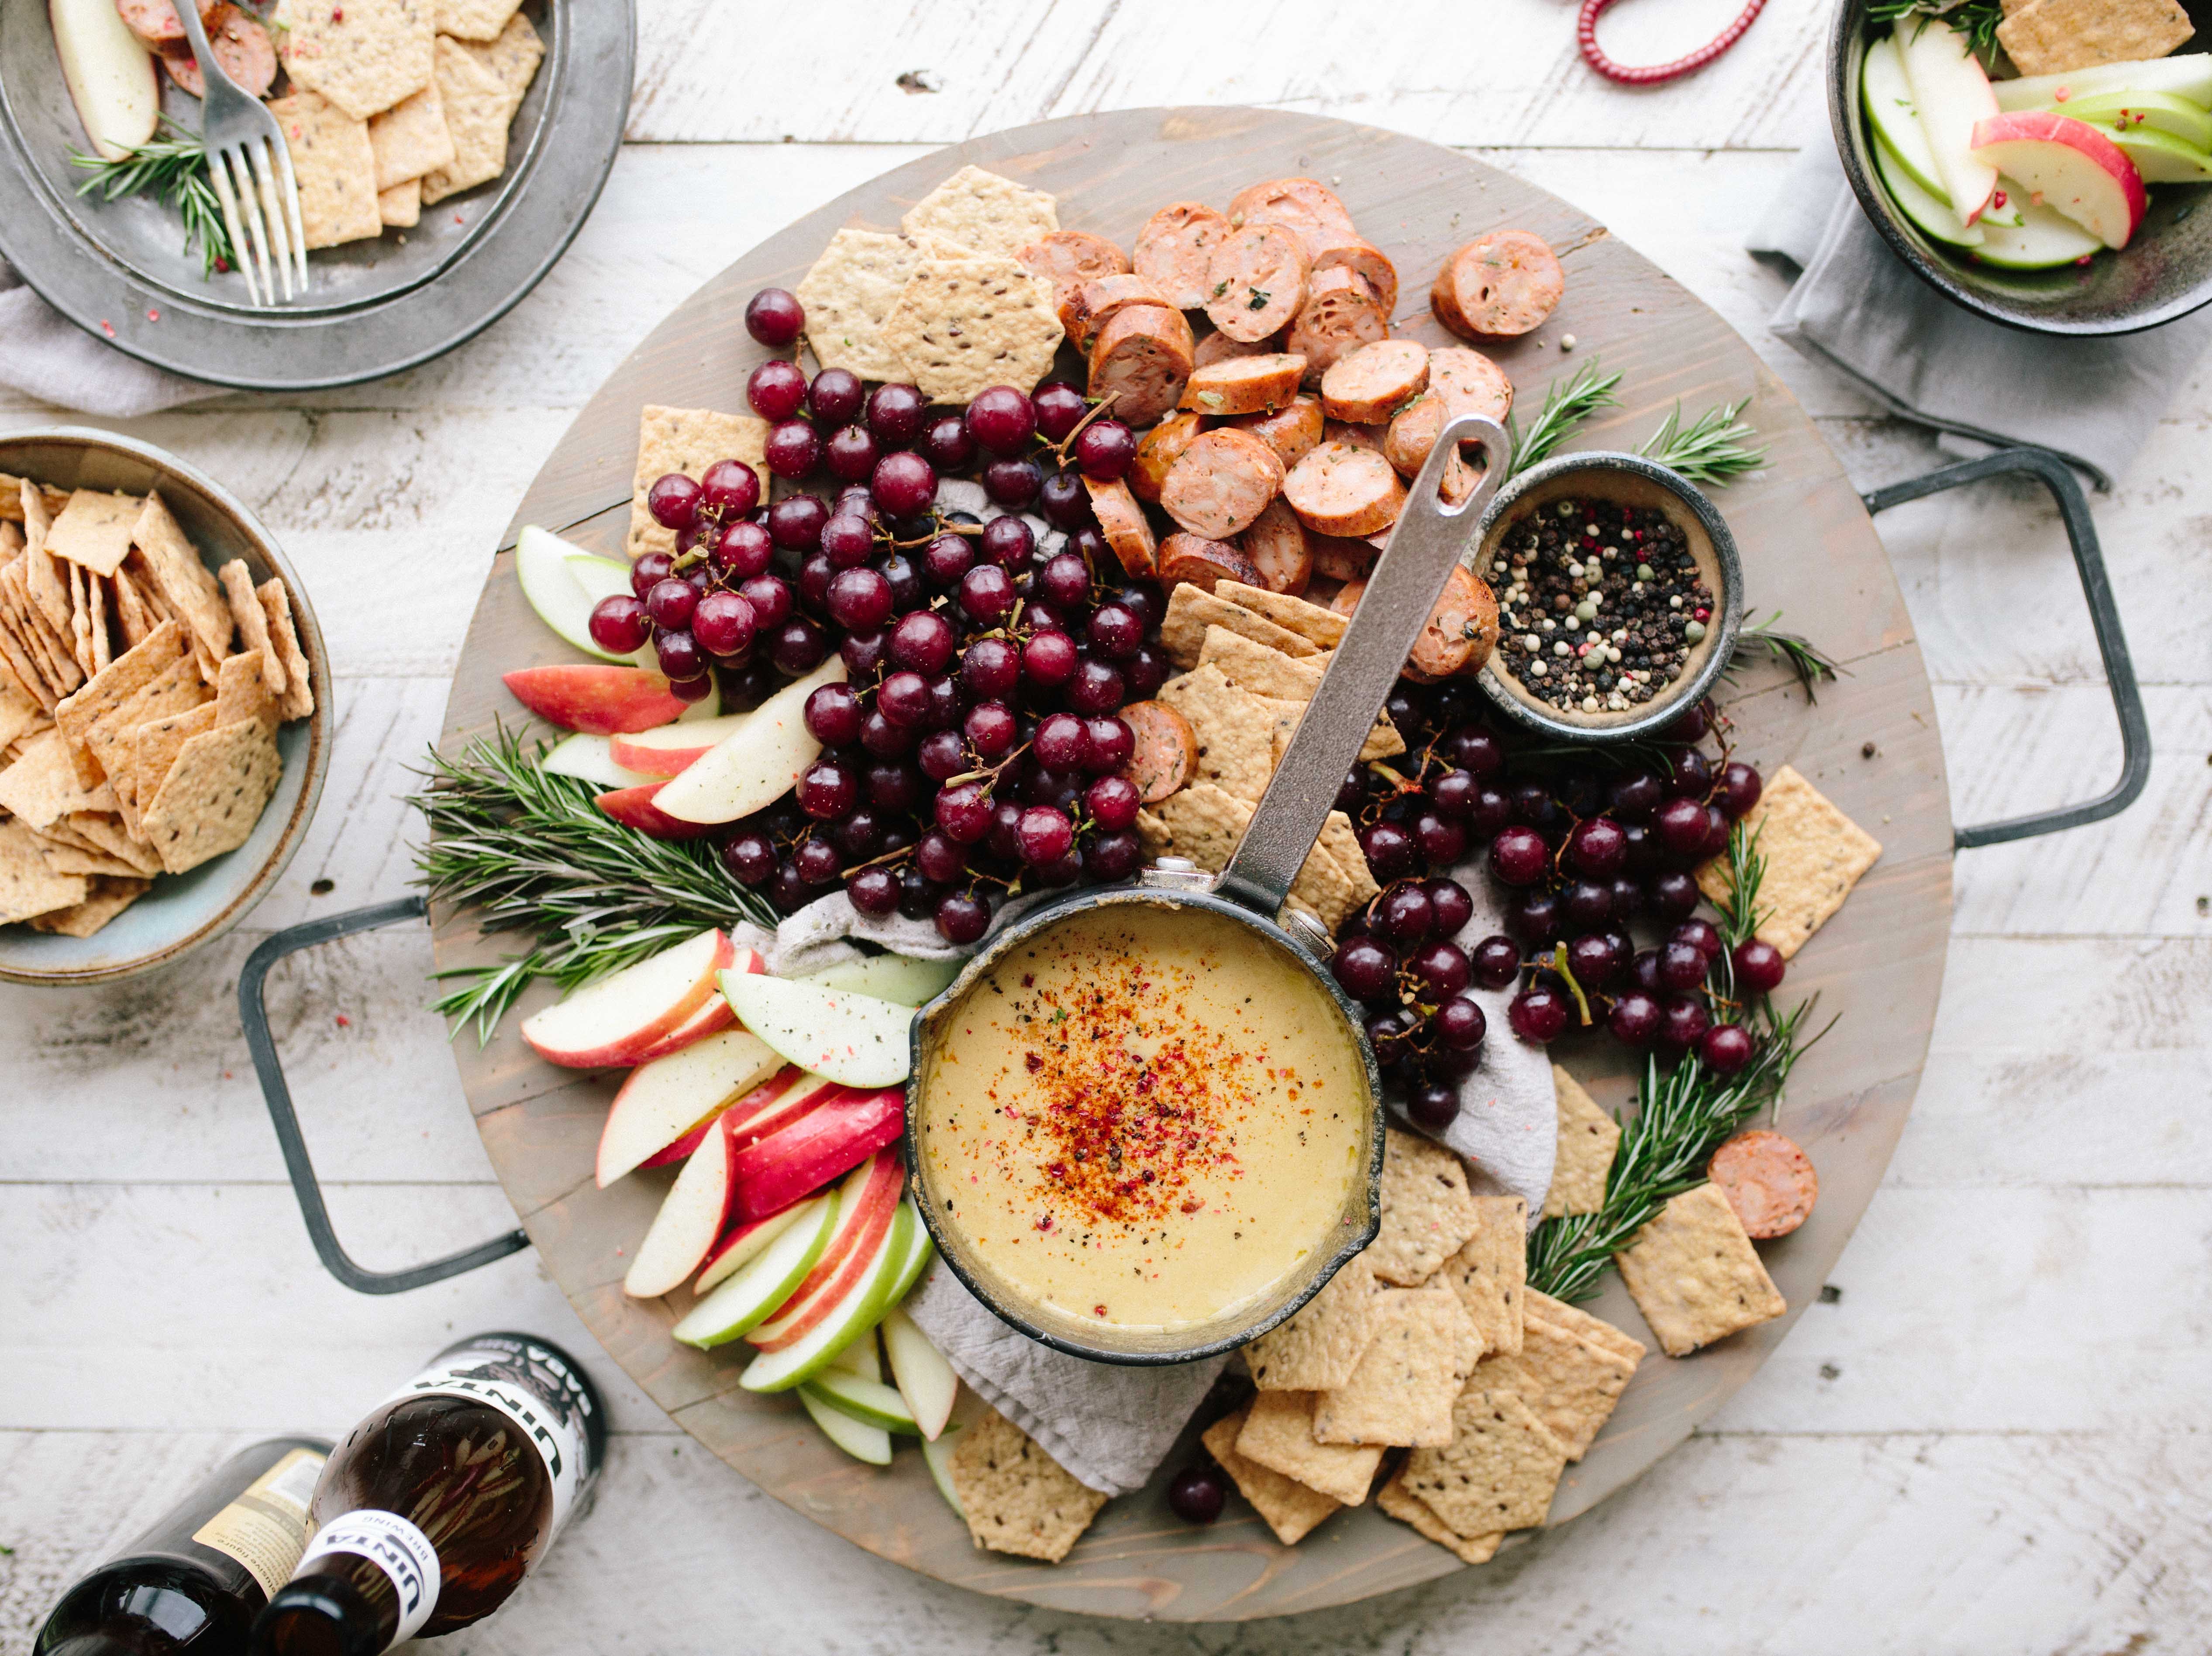 An image of a platter of crackers, fruit, and dips as for a party.